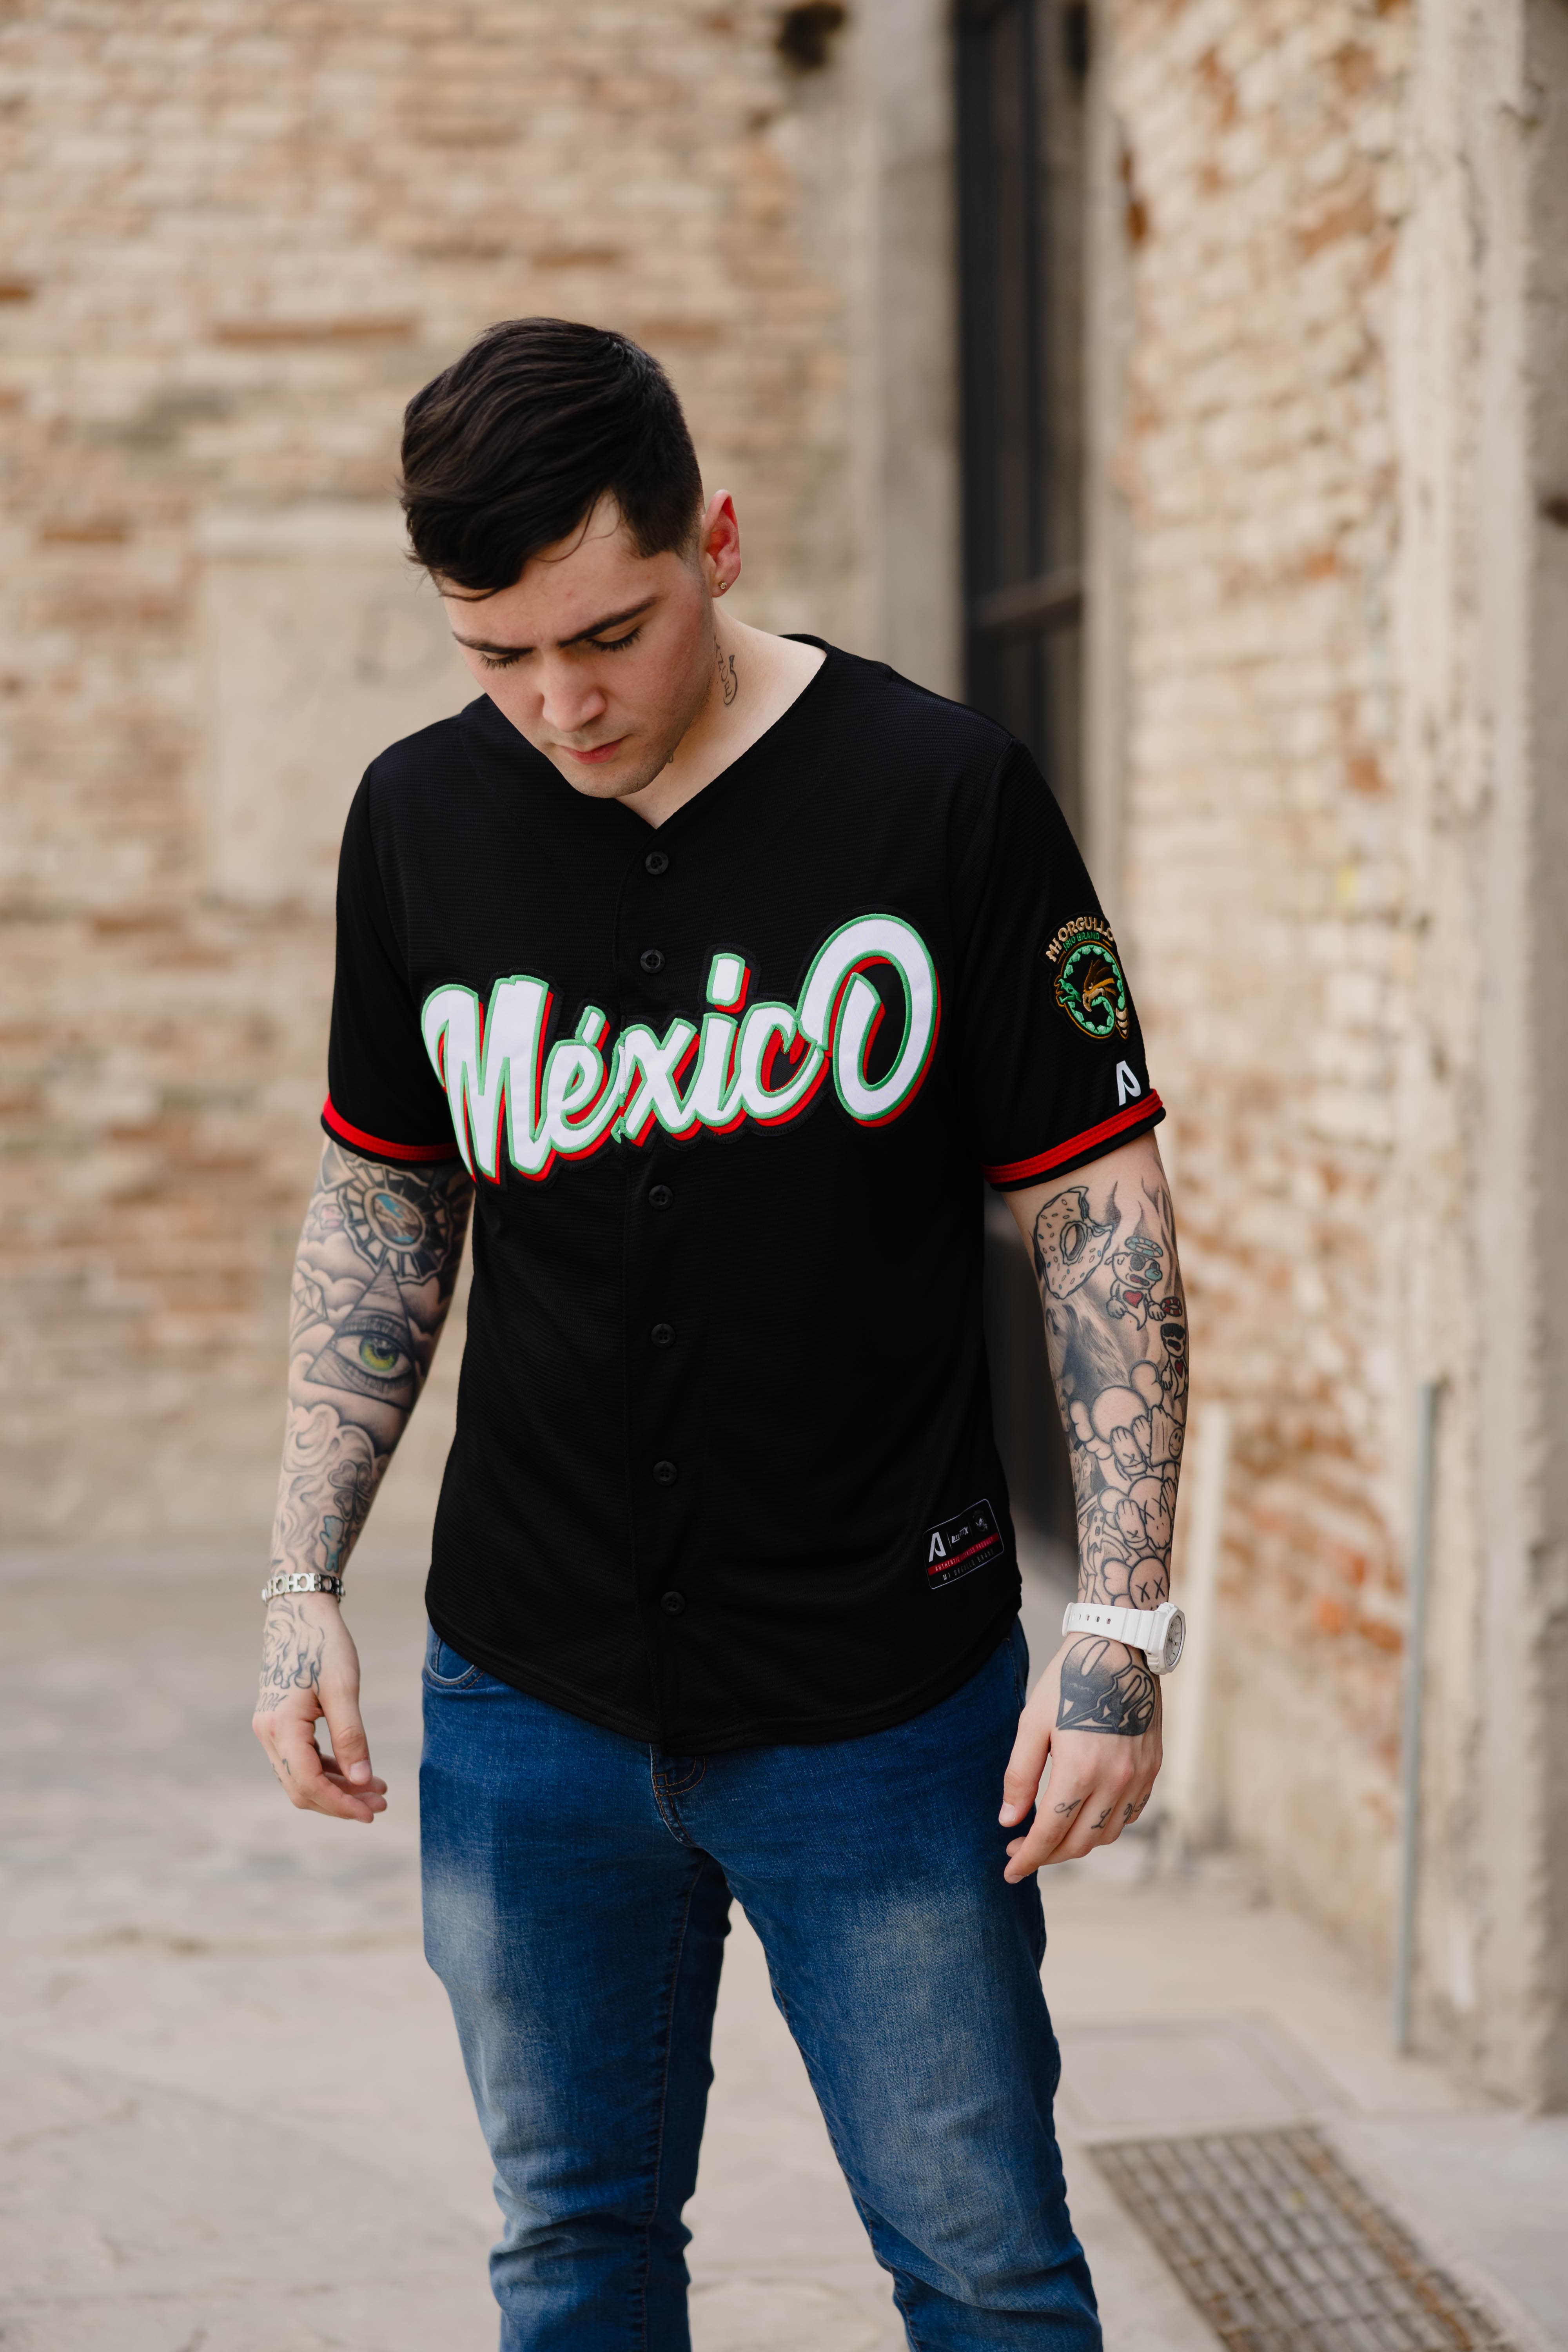  Your Mexican t-shirt